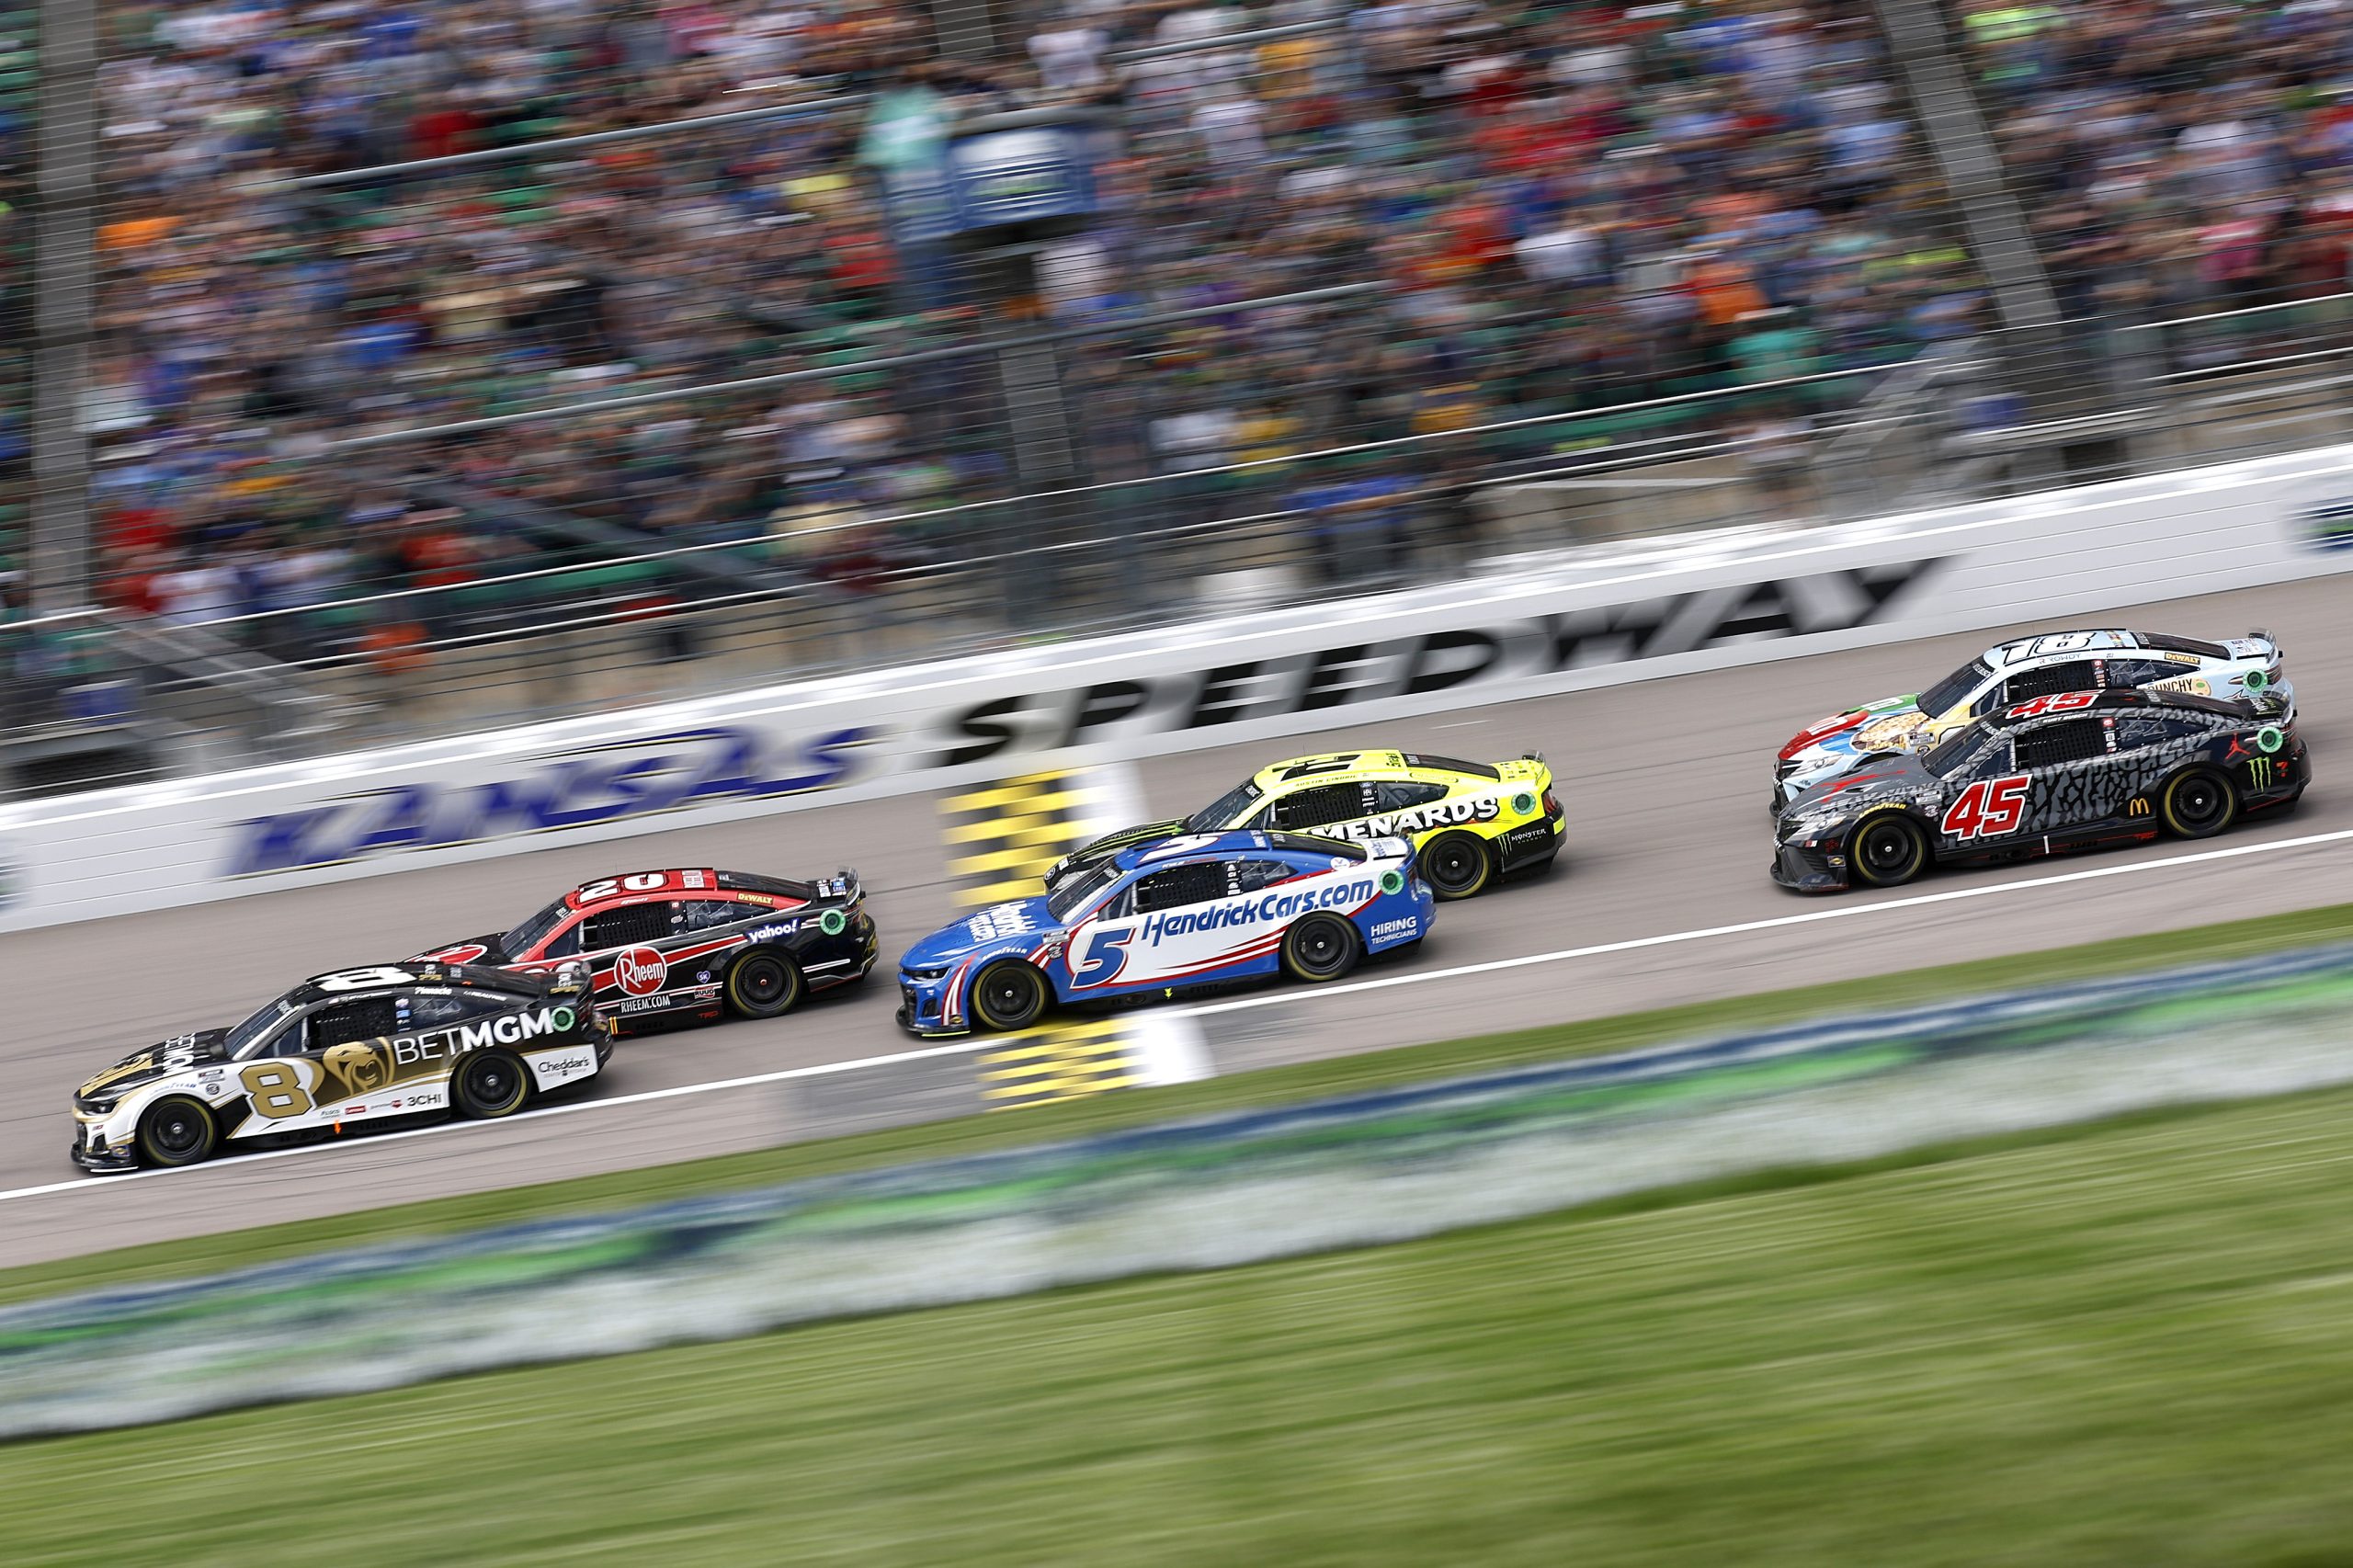 Credit: KANSAS CITY, KANSAS - MAY 15: Tyler Reddick, driver of the #8 BetMGM Chevrolet, Christopher Bell, driver of the #20 Rheem Toyota, Kyle Larson, driver of the #5 HendrickCars.com Chevrolet, Austin Cindric, driver of the #2 Menards/Monster Ford, Kurt Busch, driver of the #45 Jordan Brand Toyota, and Kyle Busch, driver of the #18 M&M's Crunchy Cookie Toyota, race during the NASCAR Cup Series AdventHealth 400 at Kansas Speedway on May 15, 2022 in Kansas City, Kansas. (Photo by Chris Graythen/Getty Images)